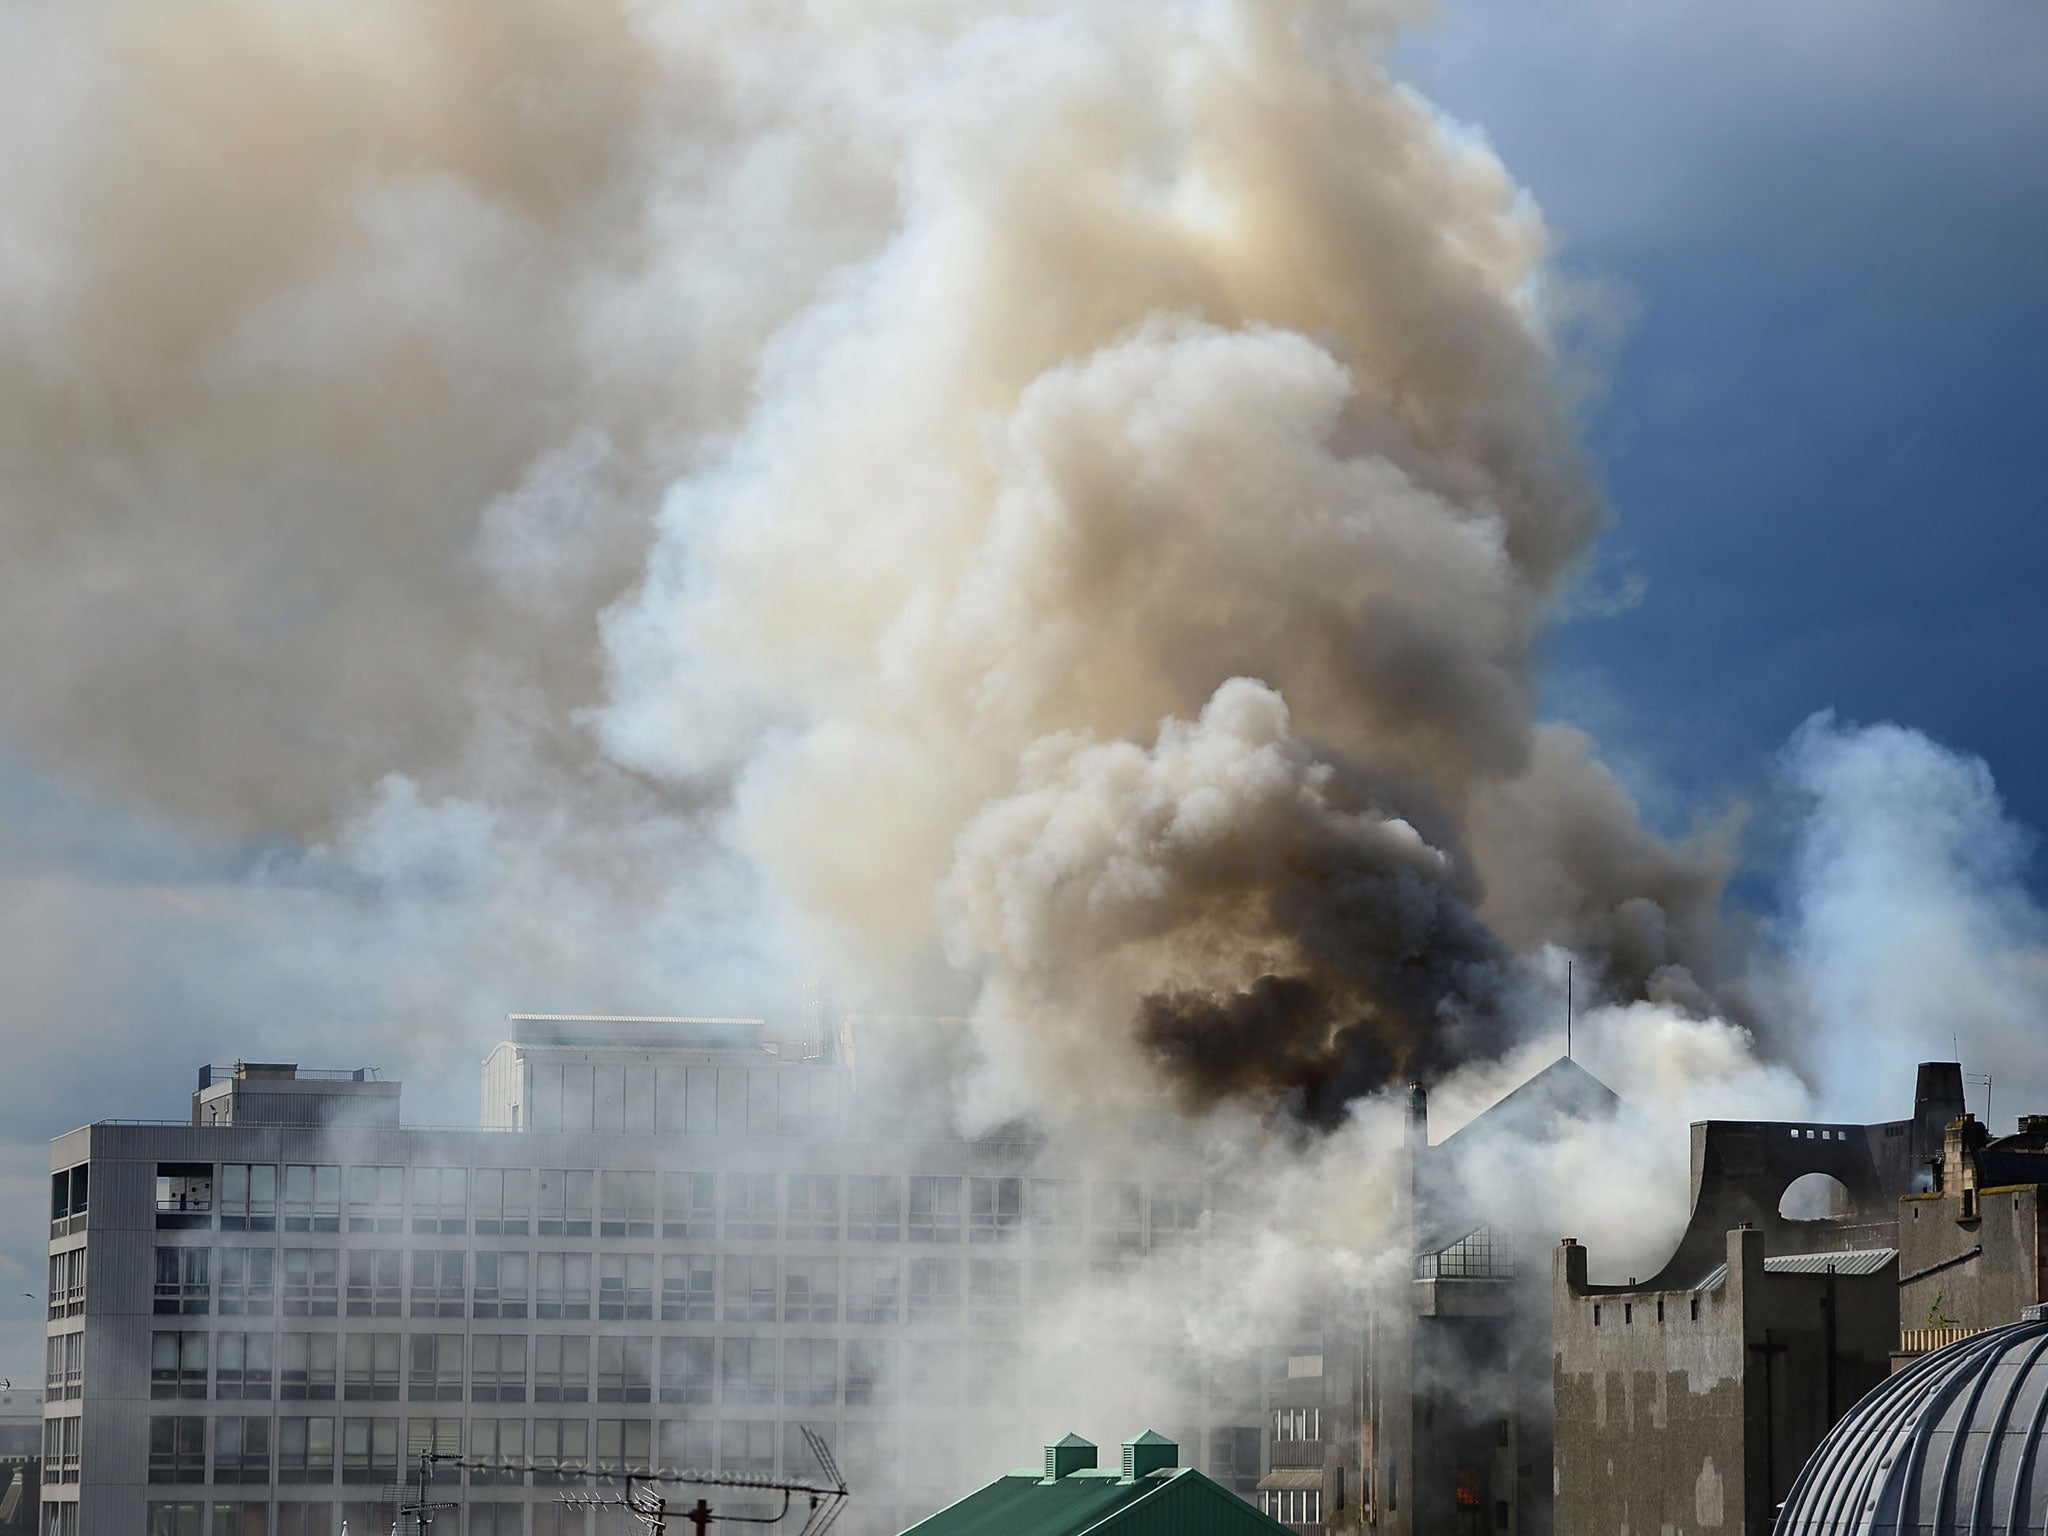 Smoke rises into the sky after a fire broke out at the Glasgow School of Art Charles Rennie Mackintosh Building in Glasgow